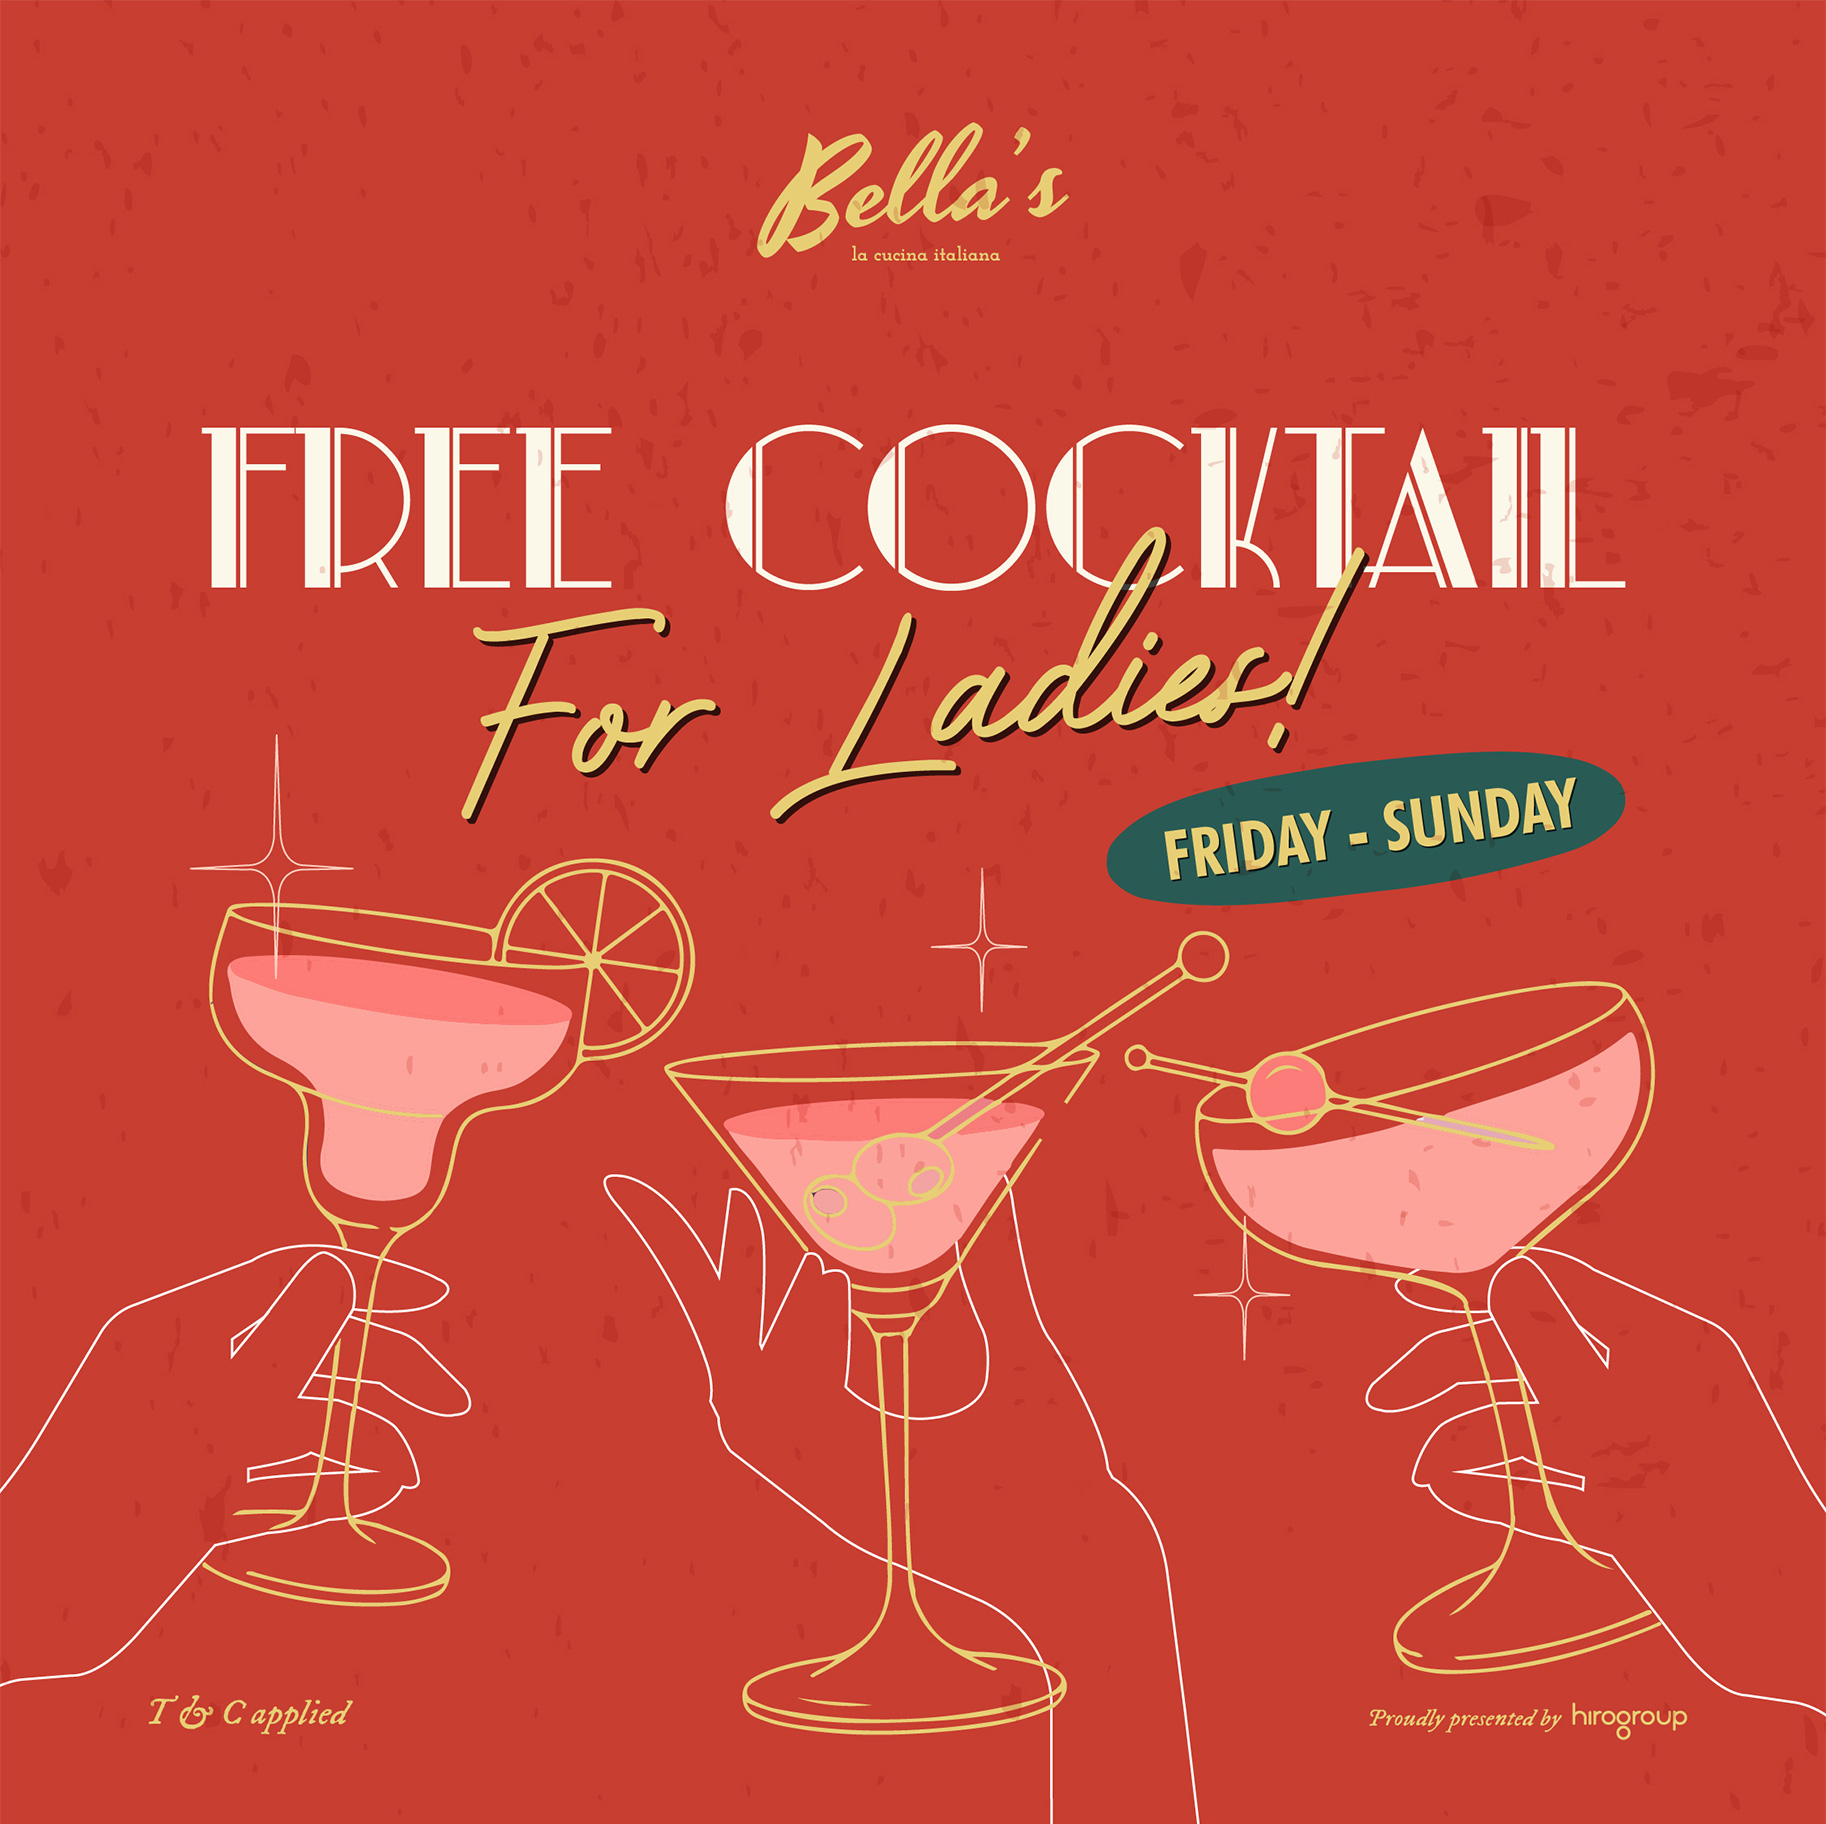 Free Cocktail